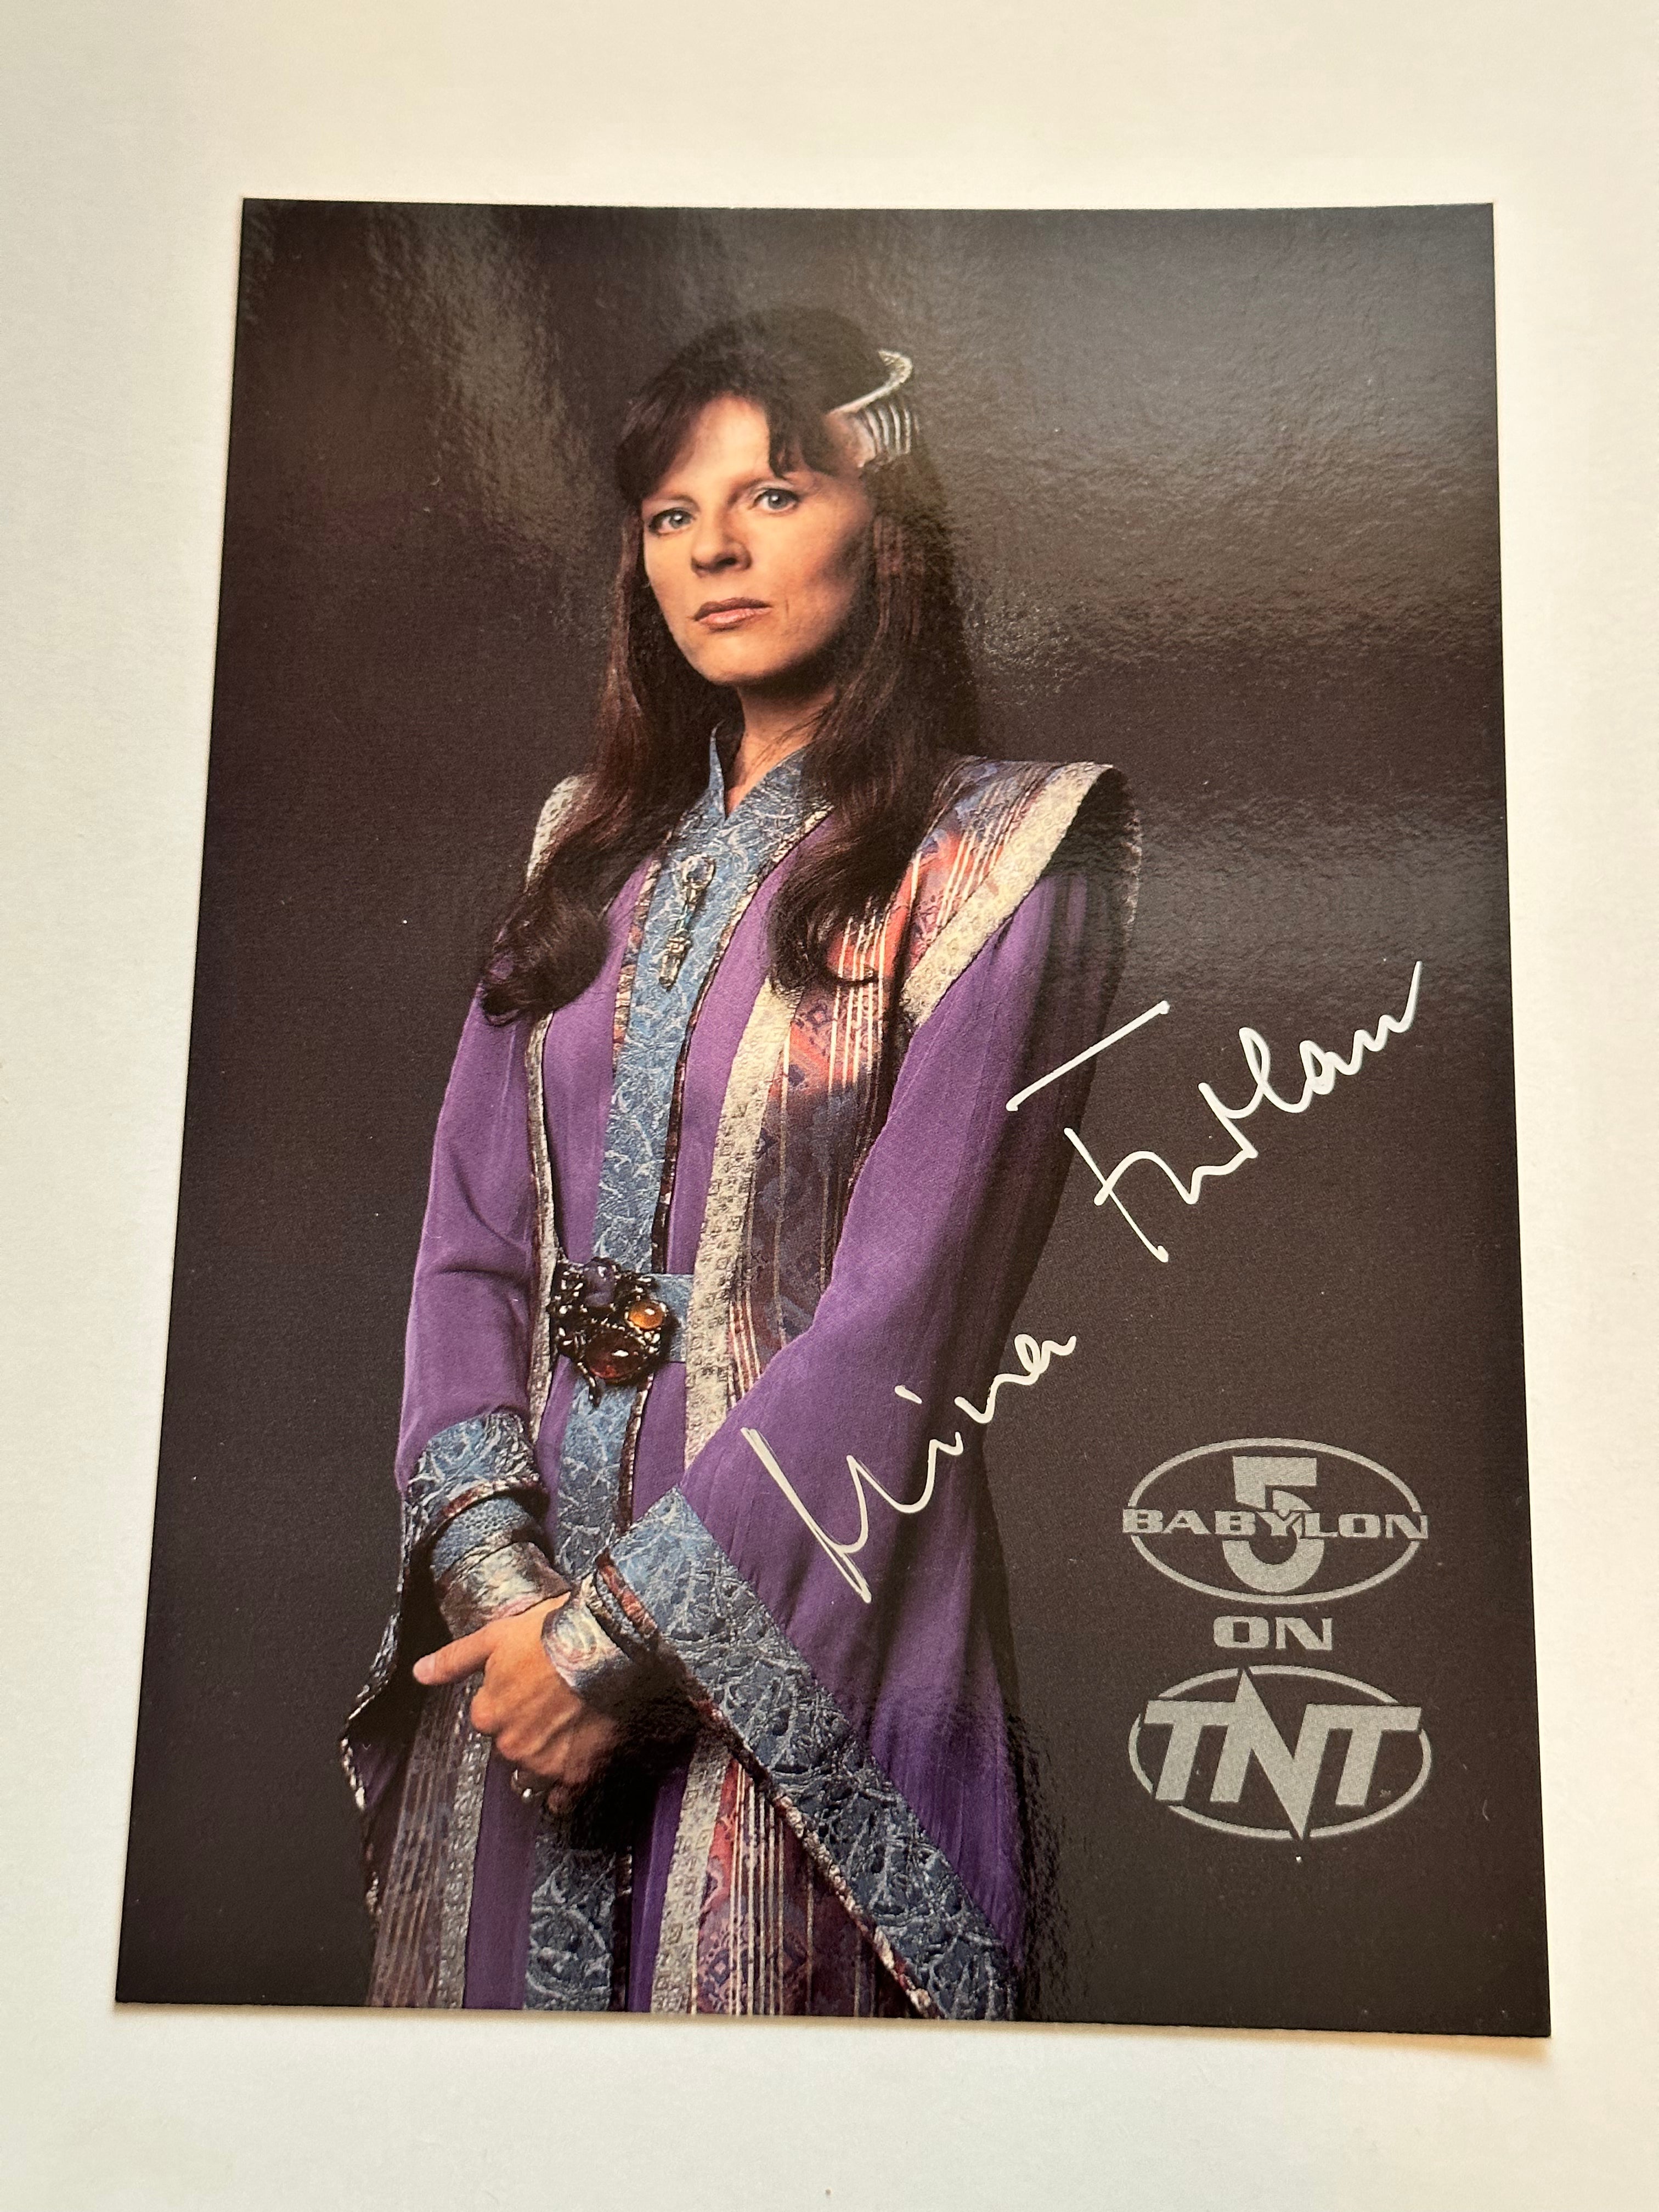 Babylon 5 scifi Tv show card signed by Mira Furlan sold with COA